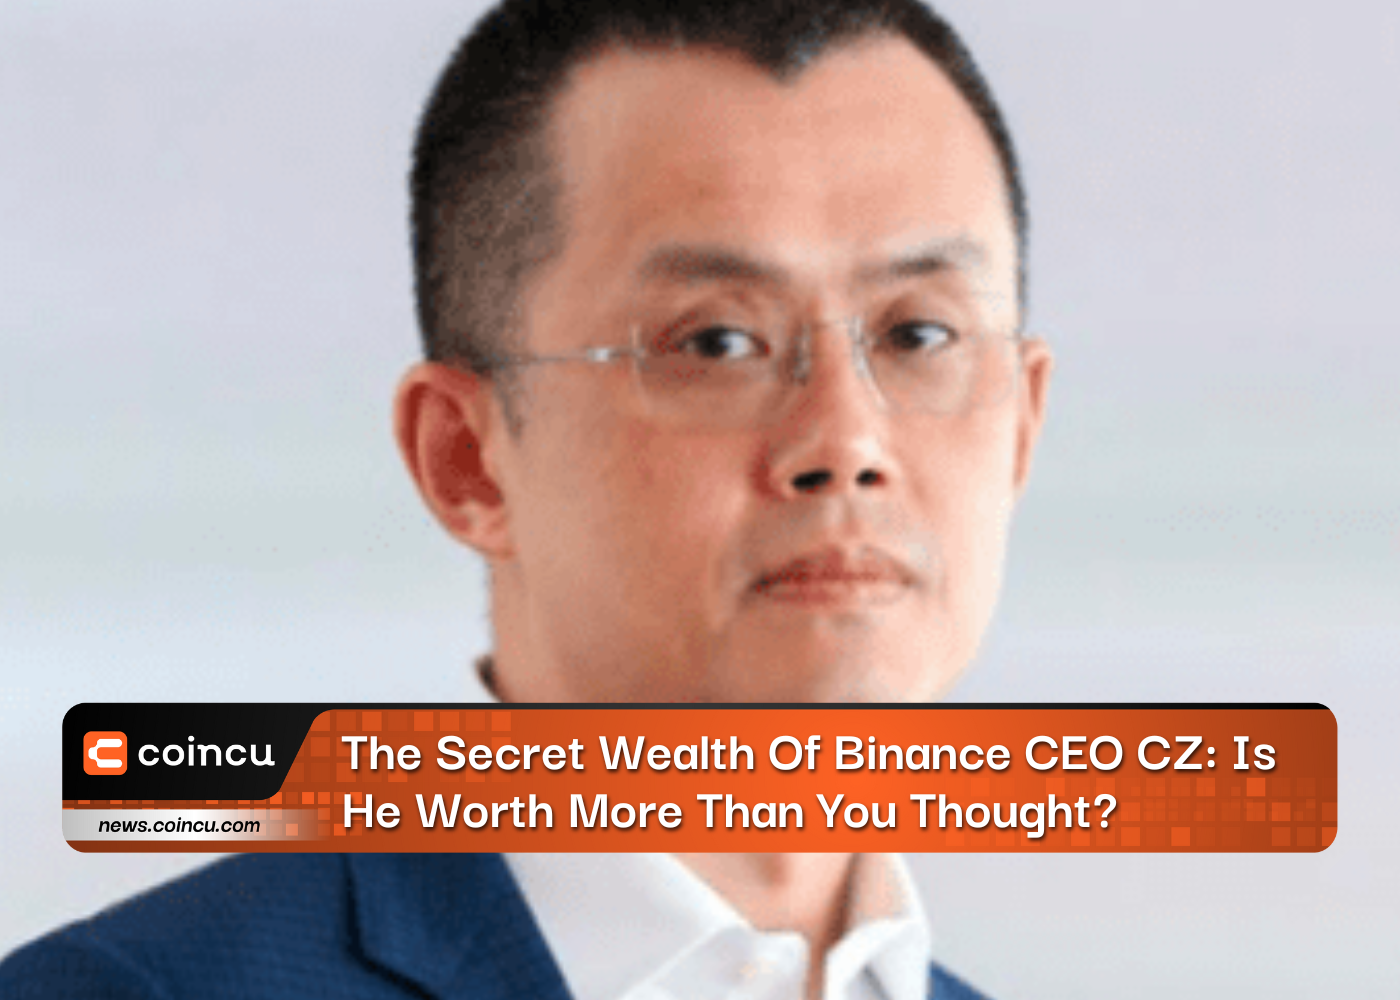 The Secret Wealth Of Binance CEO CZ: Is He Worth More Than You Thought?